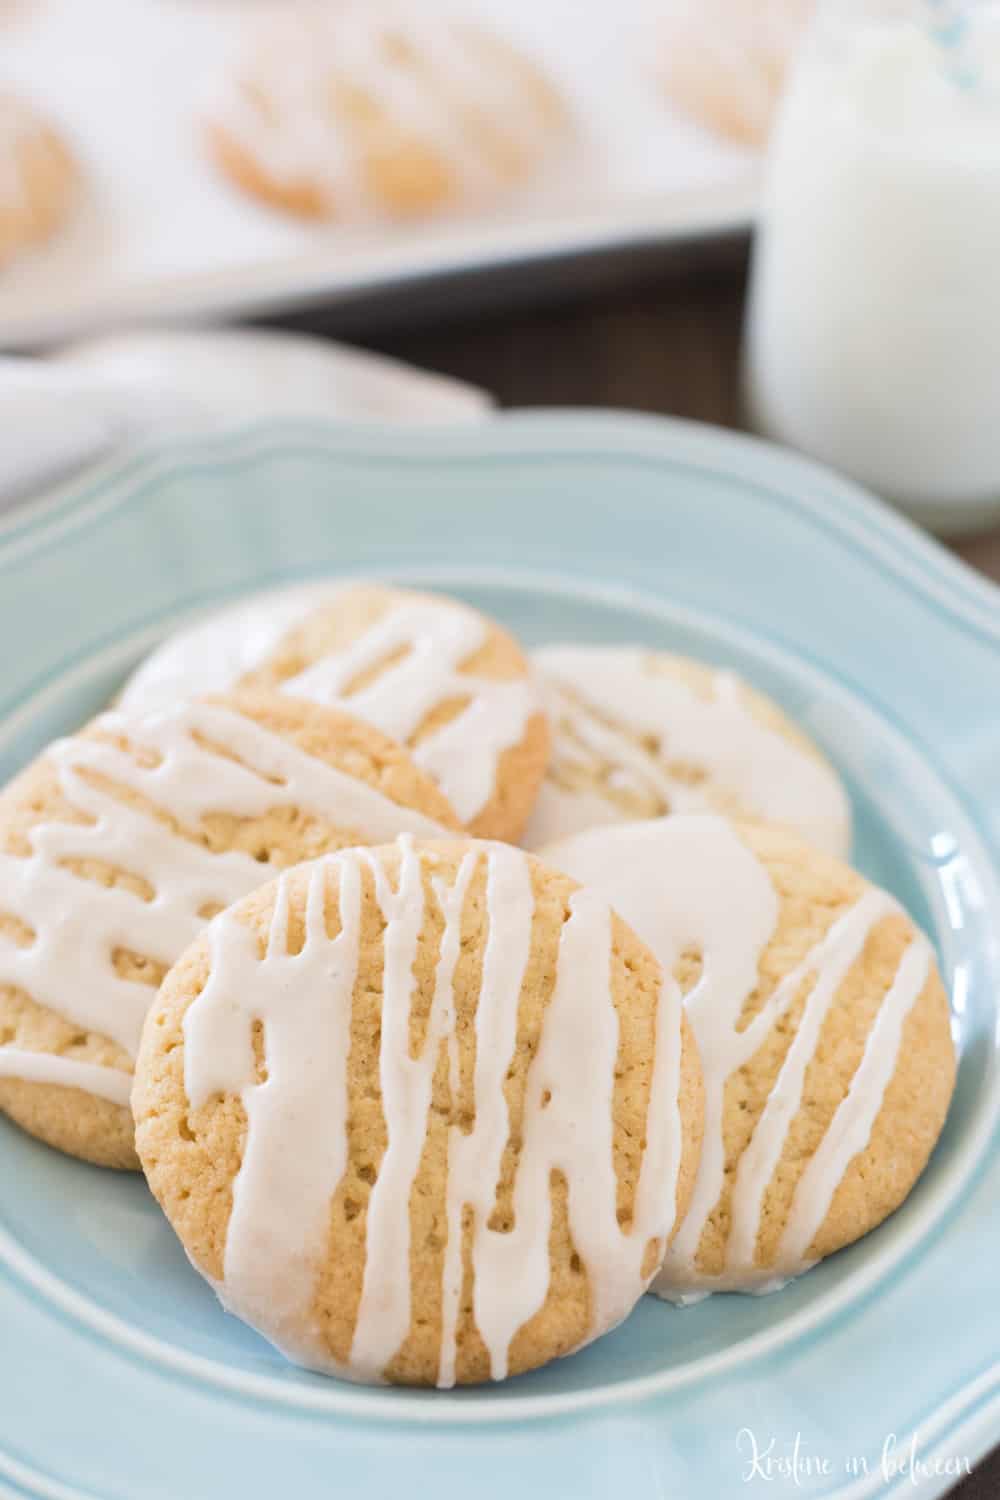 These small-batch thin and chewy maple sugar cookies are quick and easy to make and are completely delicious!